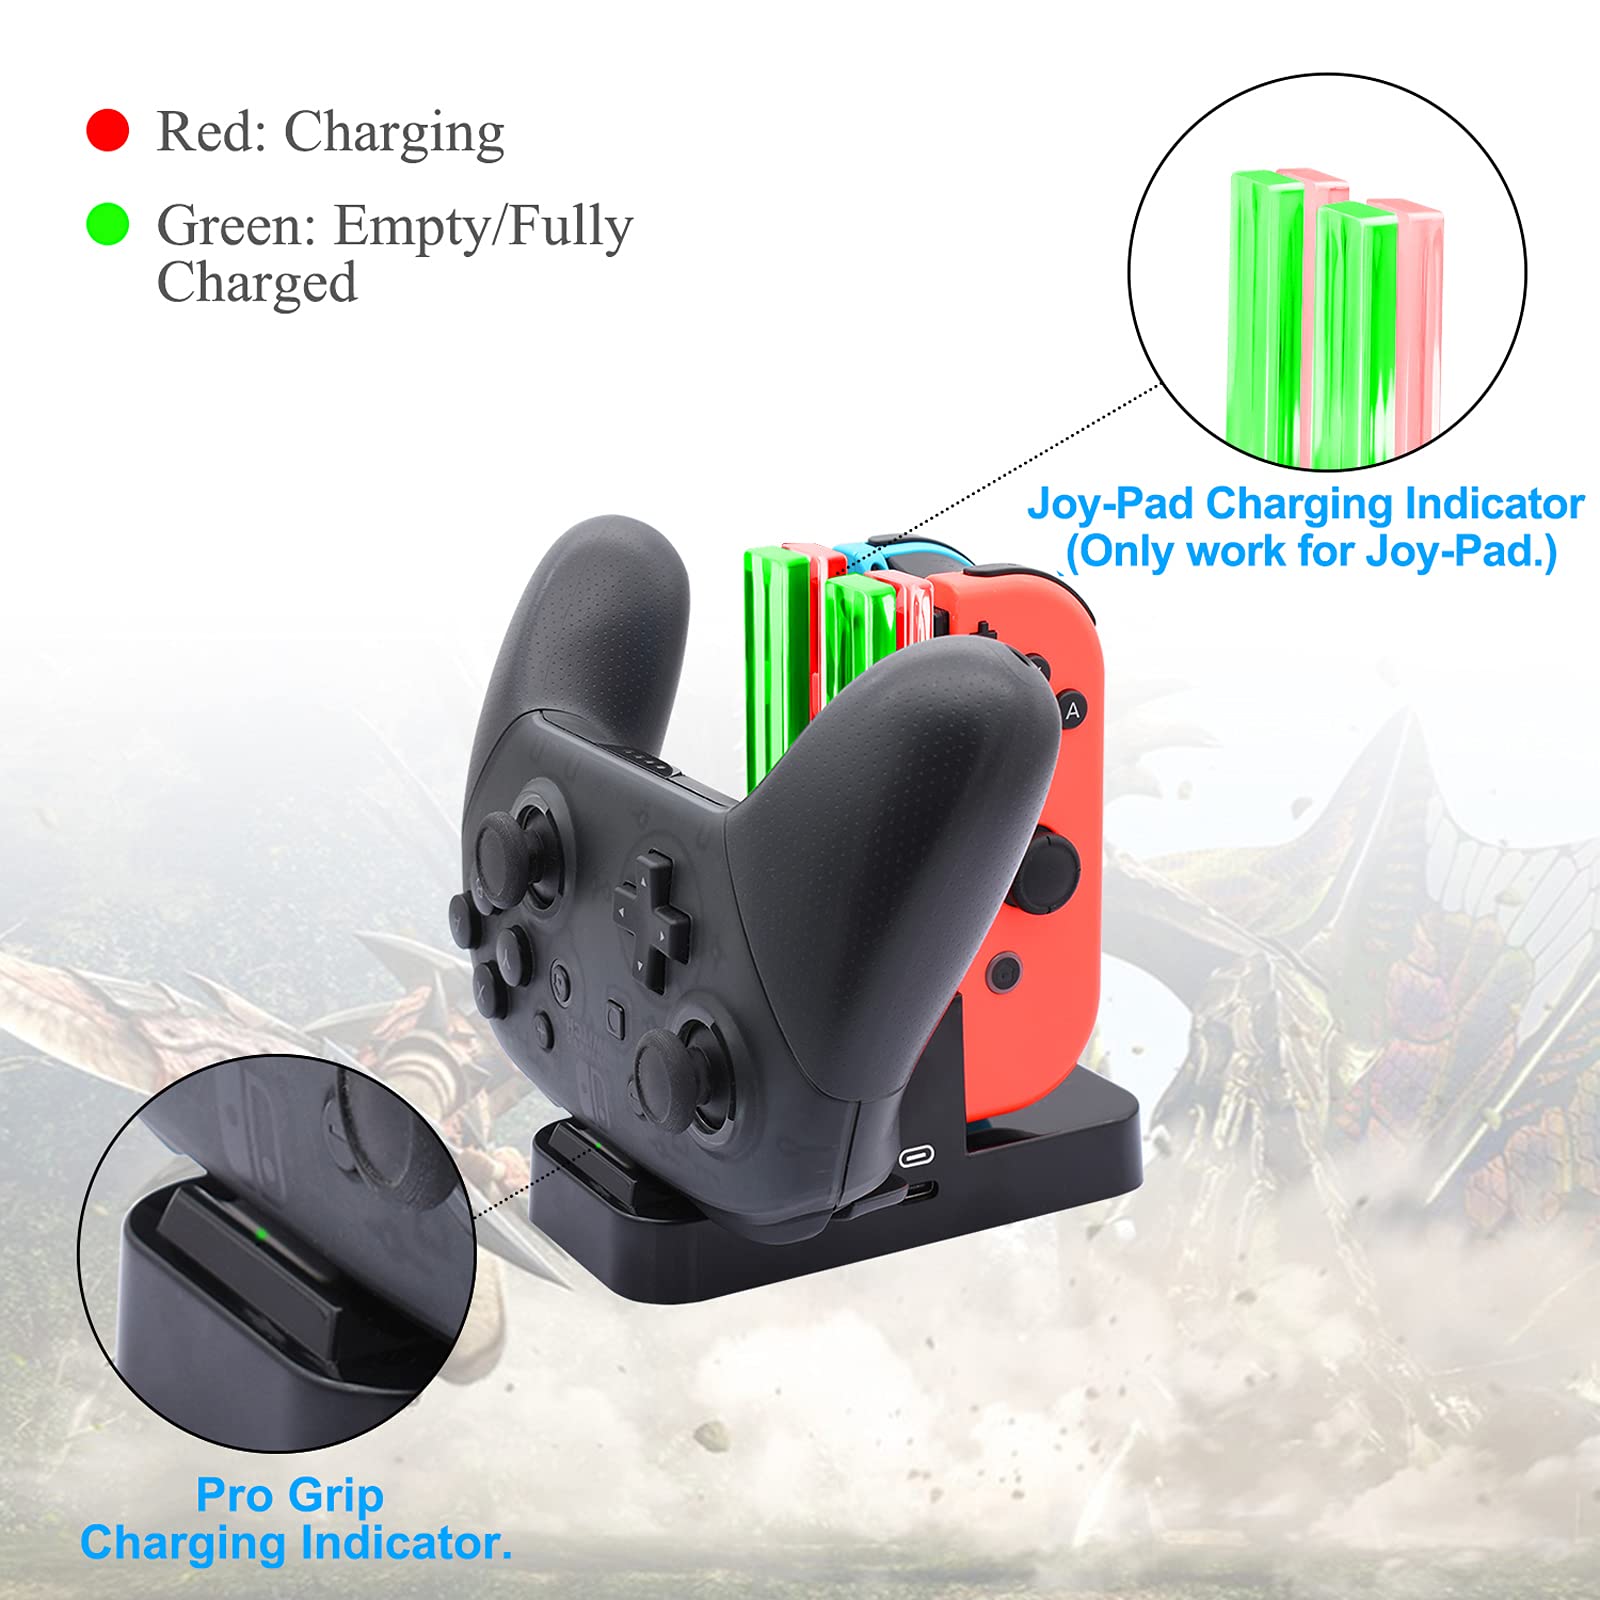 FastSnail Controller Charger Compatible with Nintendo Switch & OLED Model for Joycon, Charging Dock Station for Joy con and for Pro Controller with Charger Indicator and Type C Charging Cable